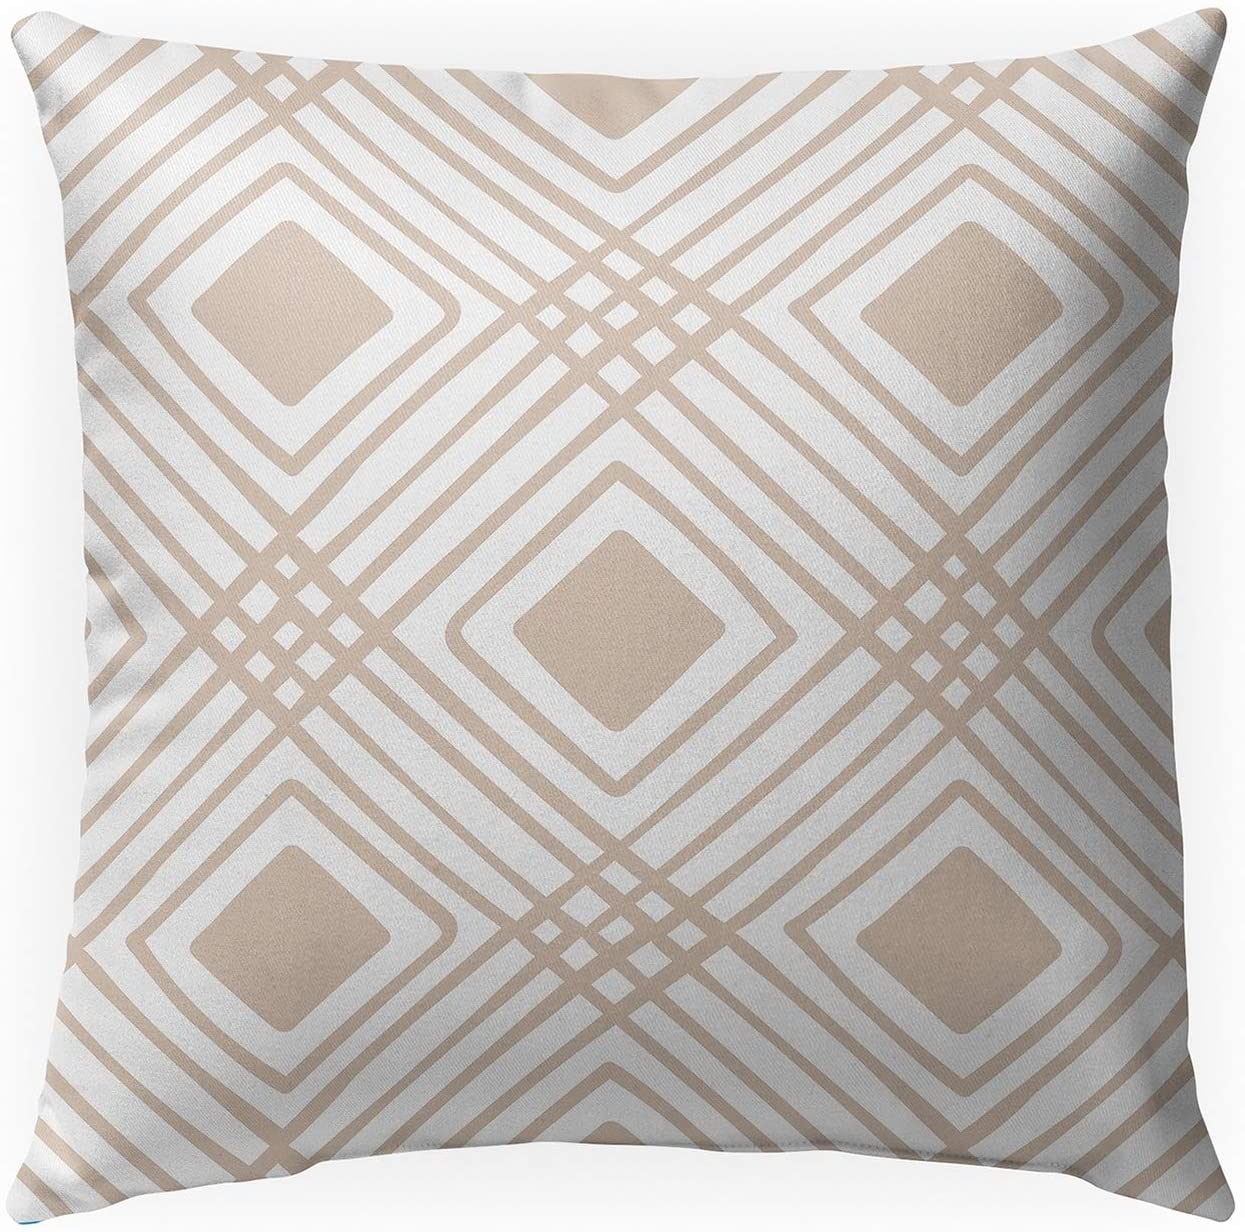 MISC Cross Diamonds Tan Indoor|Outdoor Pillow by 18x18 Tan Geometric Transitional Polyester Removable Cover